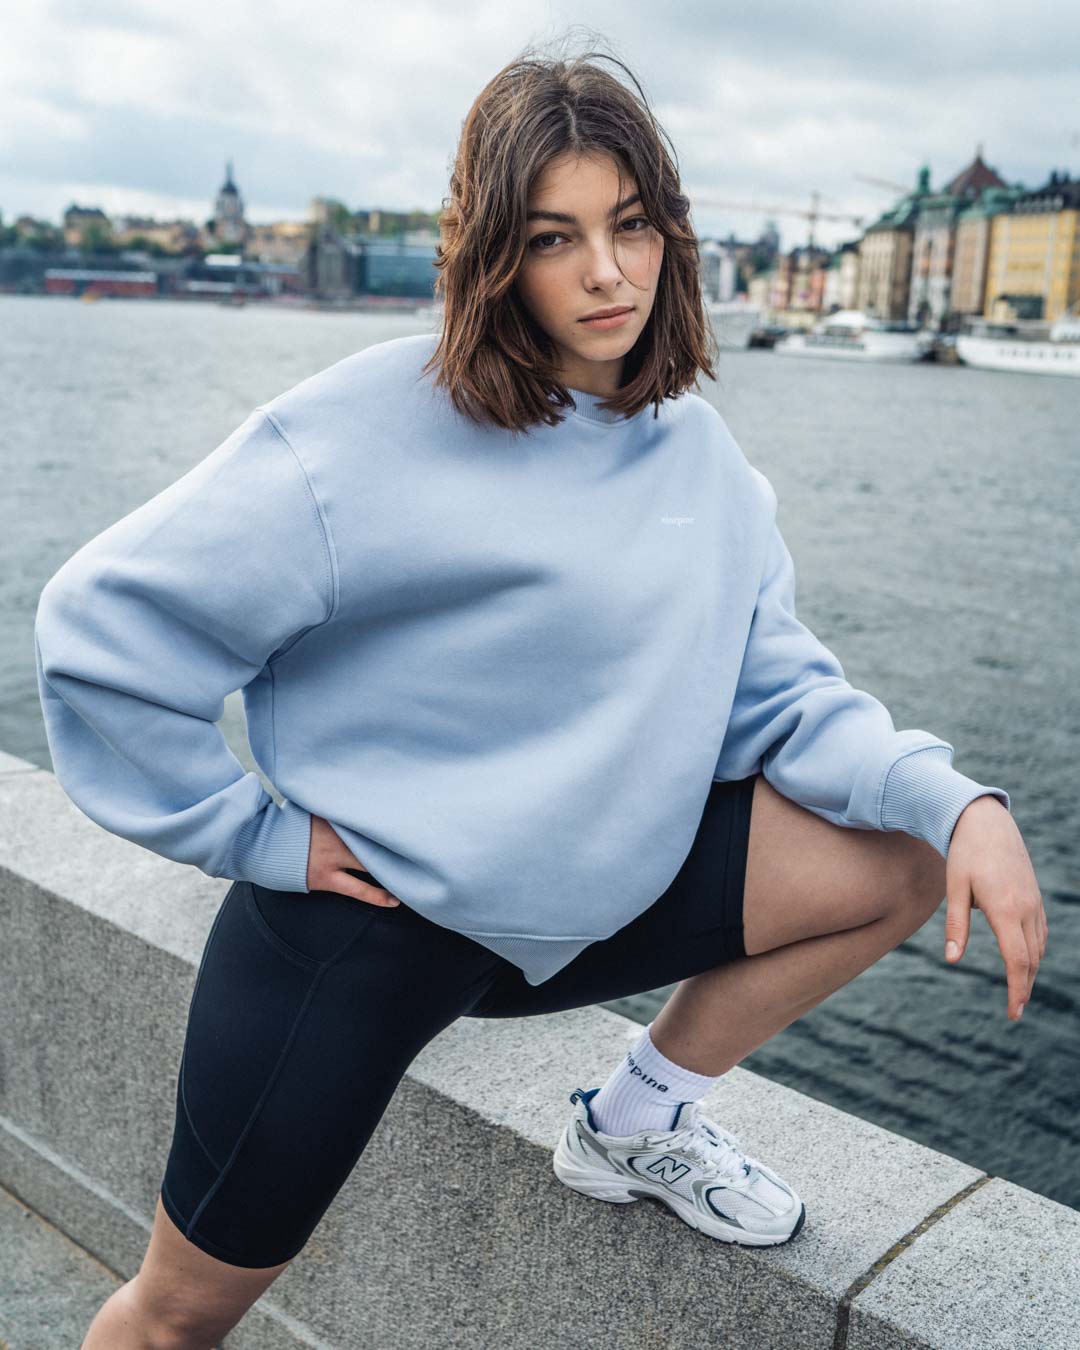 Woman in a blue ninepine sweatshirt and biker shorts by the waters edge in Stockholm